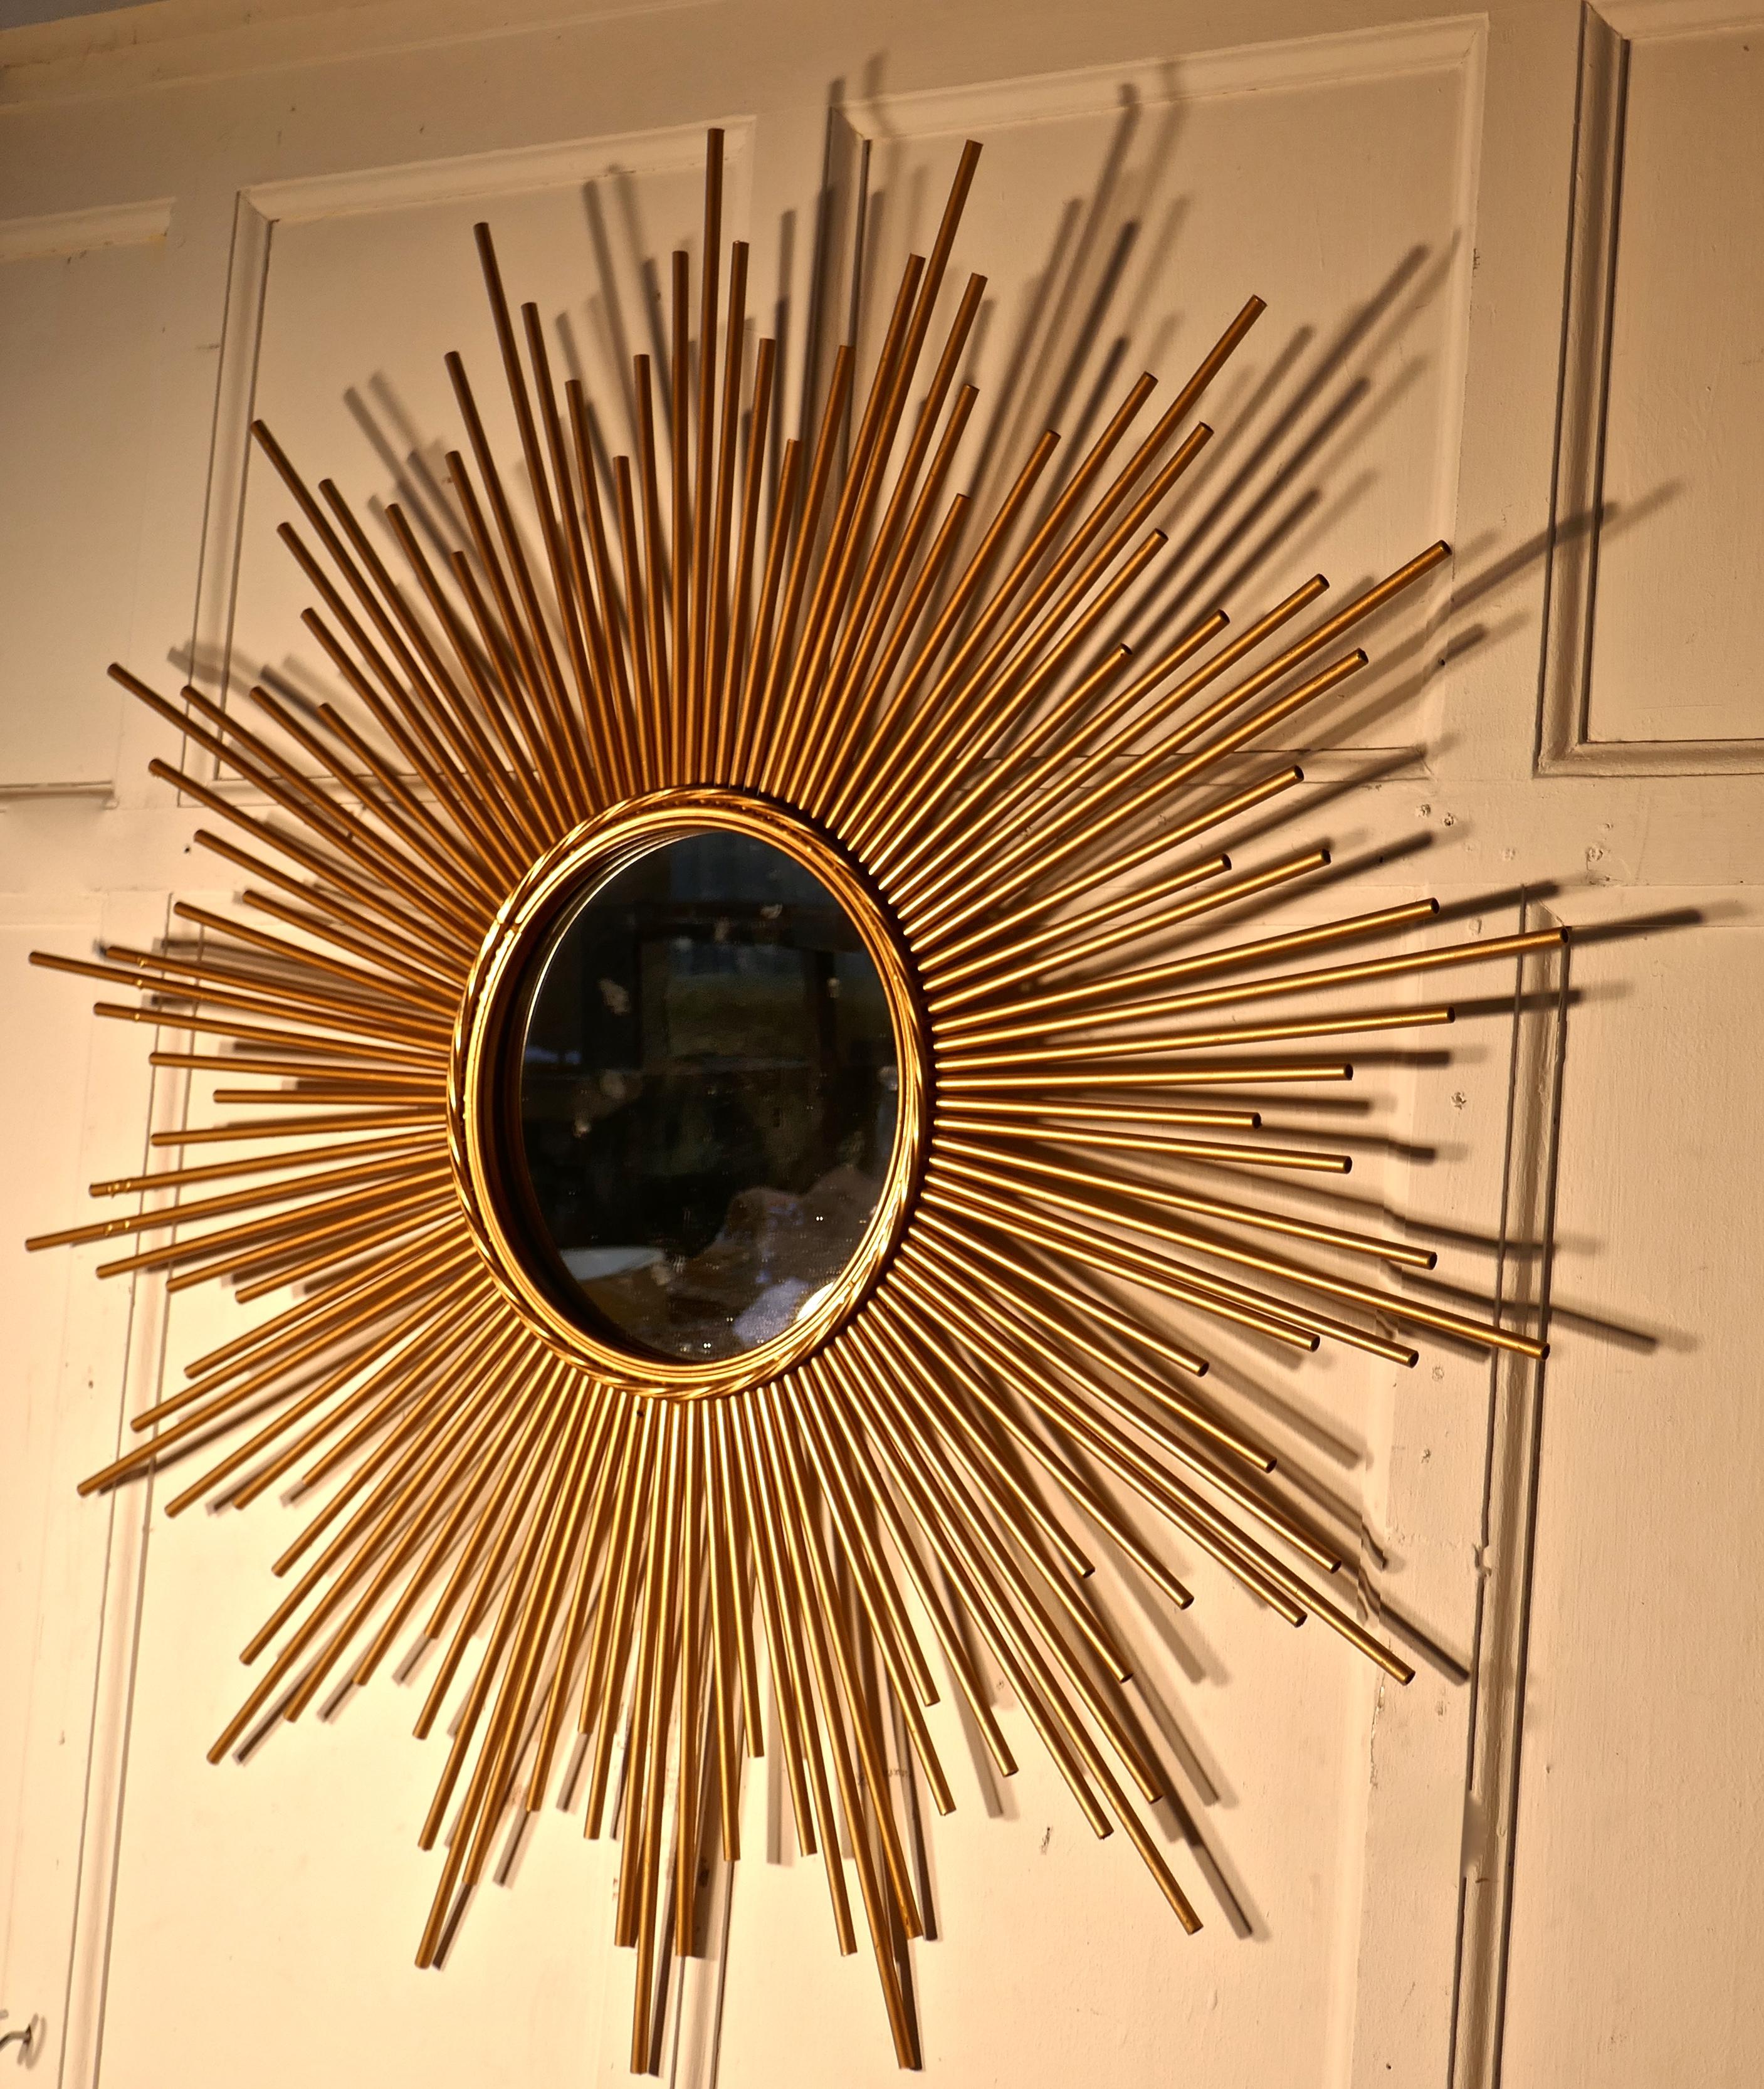 Large French midcentury sunburst-starburst brass mirror.

A Great piece, the large starburst or sunburst radiates out from the central convex mirror, the rays are in gold painted tubular brass
A Classic from the era, a very large statement